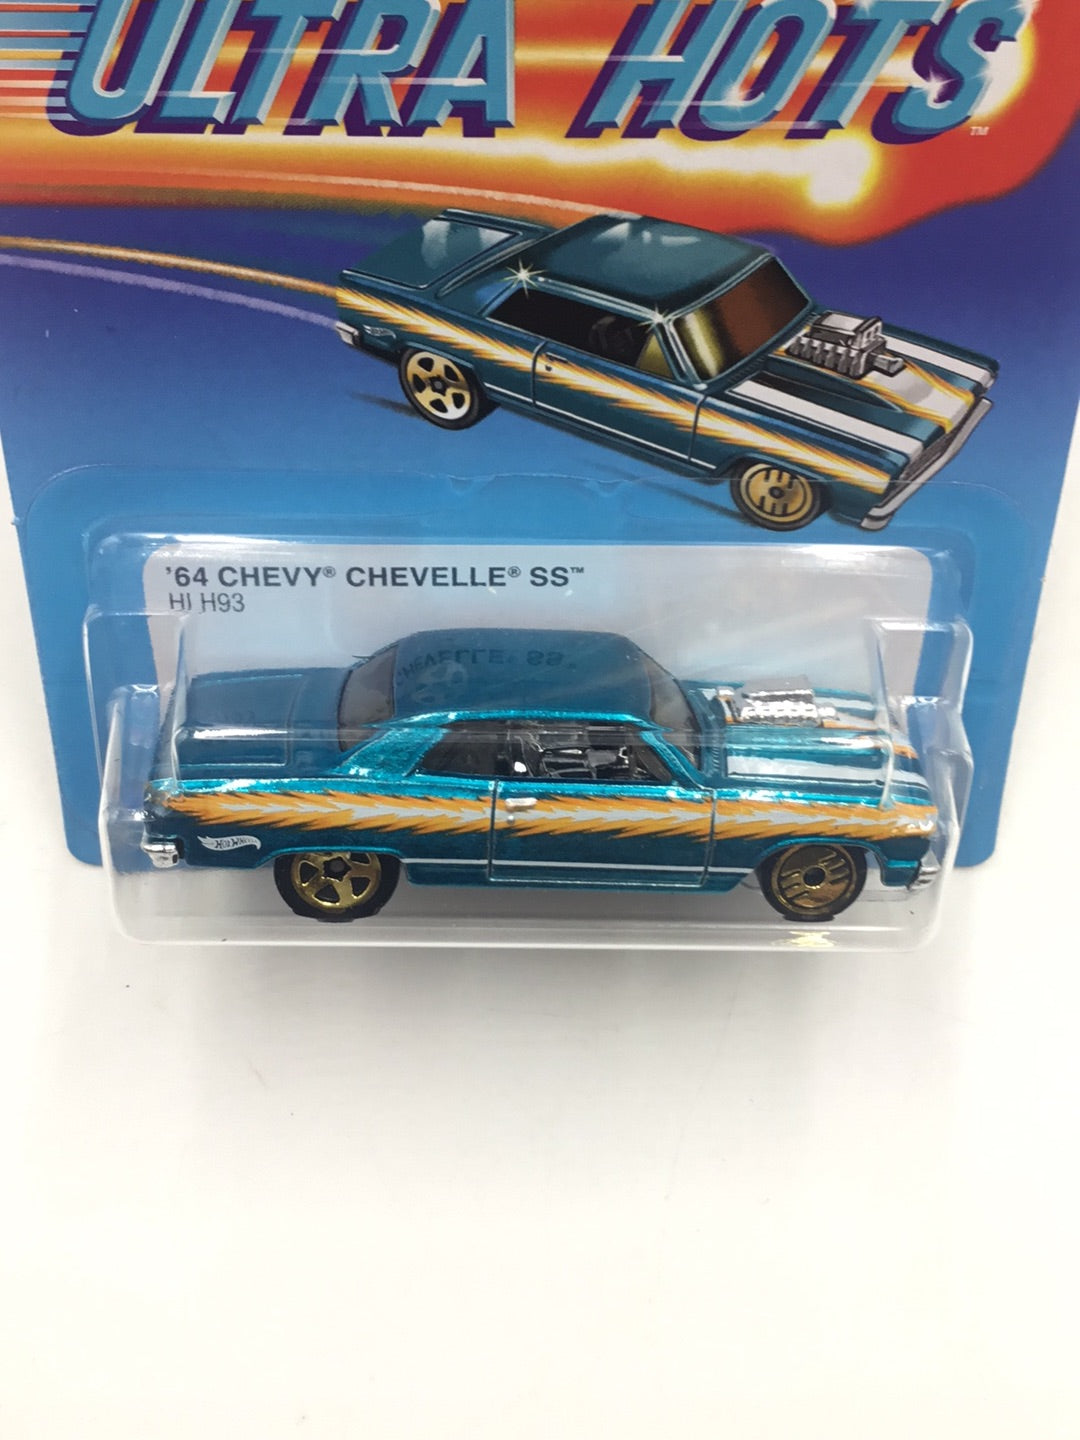 Hot wheels Ultra Hots 64 Chevy Chevelle 154F